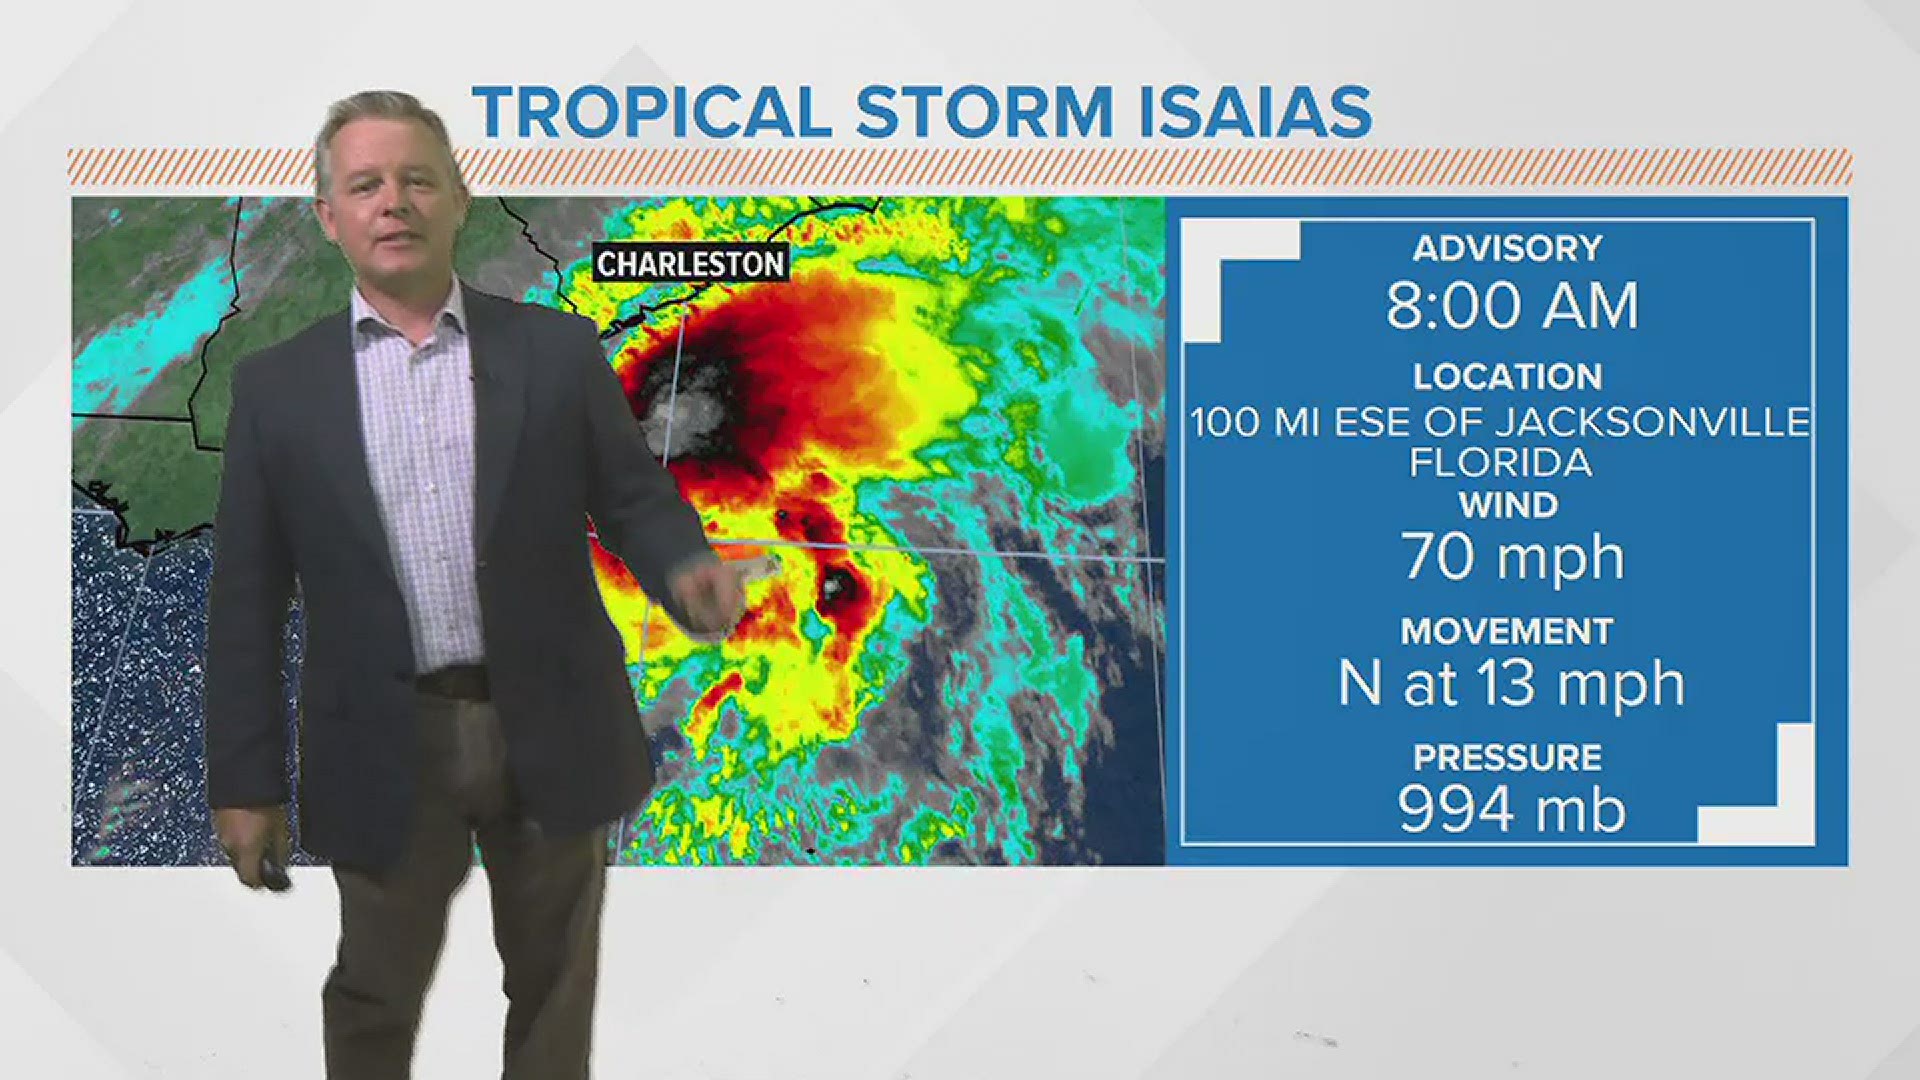 The 8 AM advisory for Tropical Storm Isaias. The storm is expected to become a Category 1 hurricane .